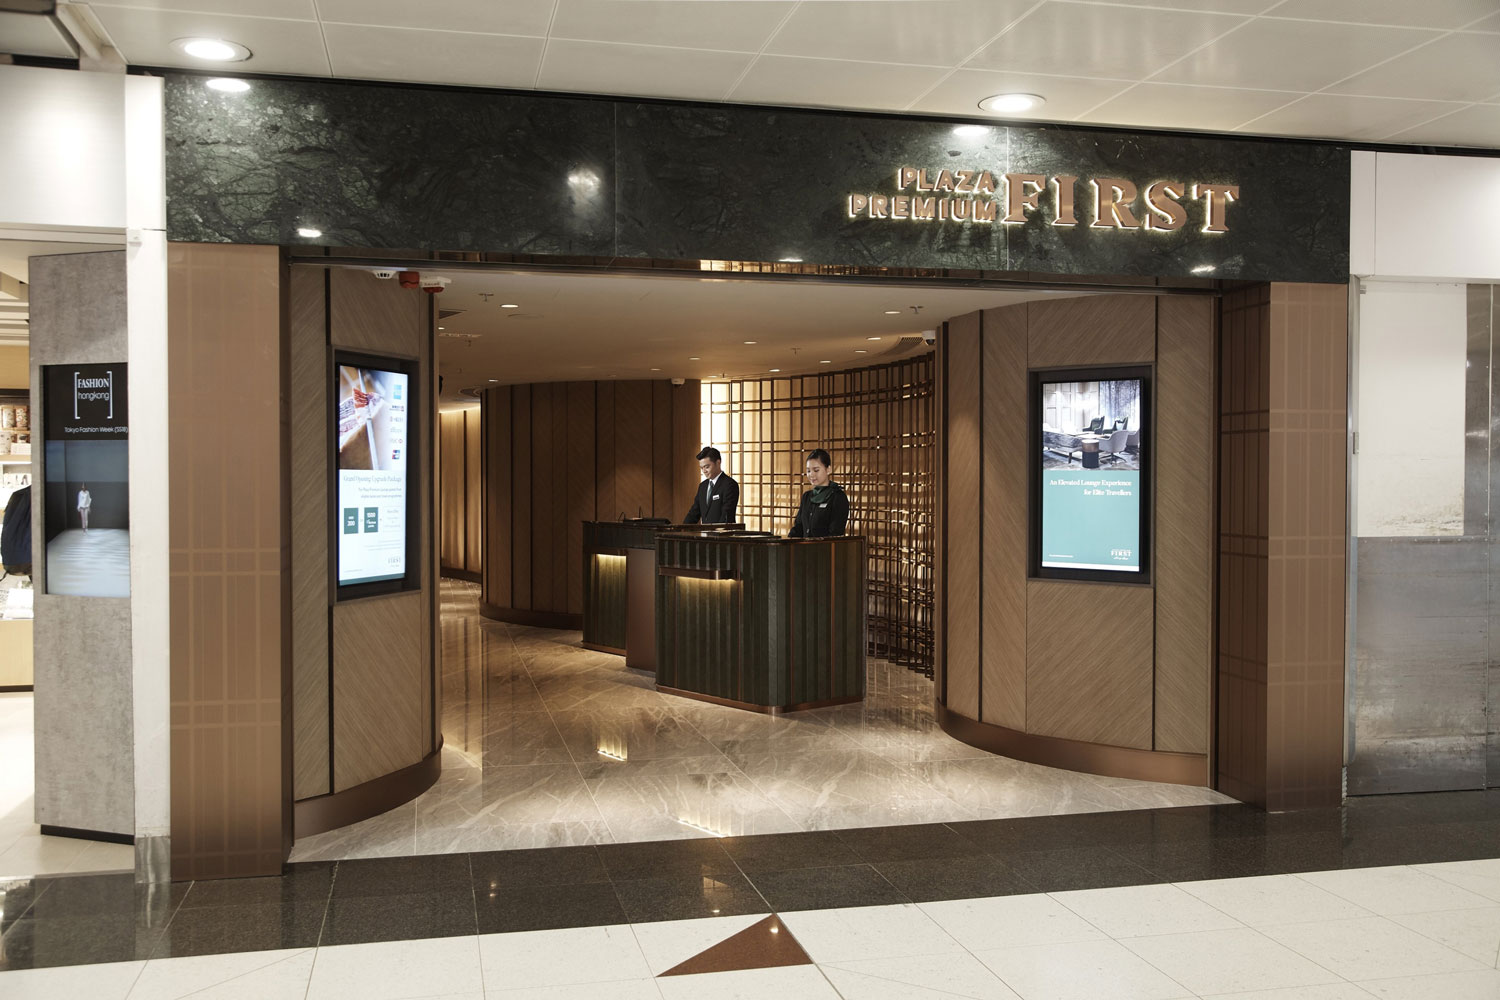 Plaza Premium First, a new lounge concept debuting in Hong Kong International Airport.